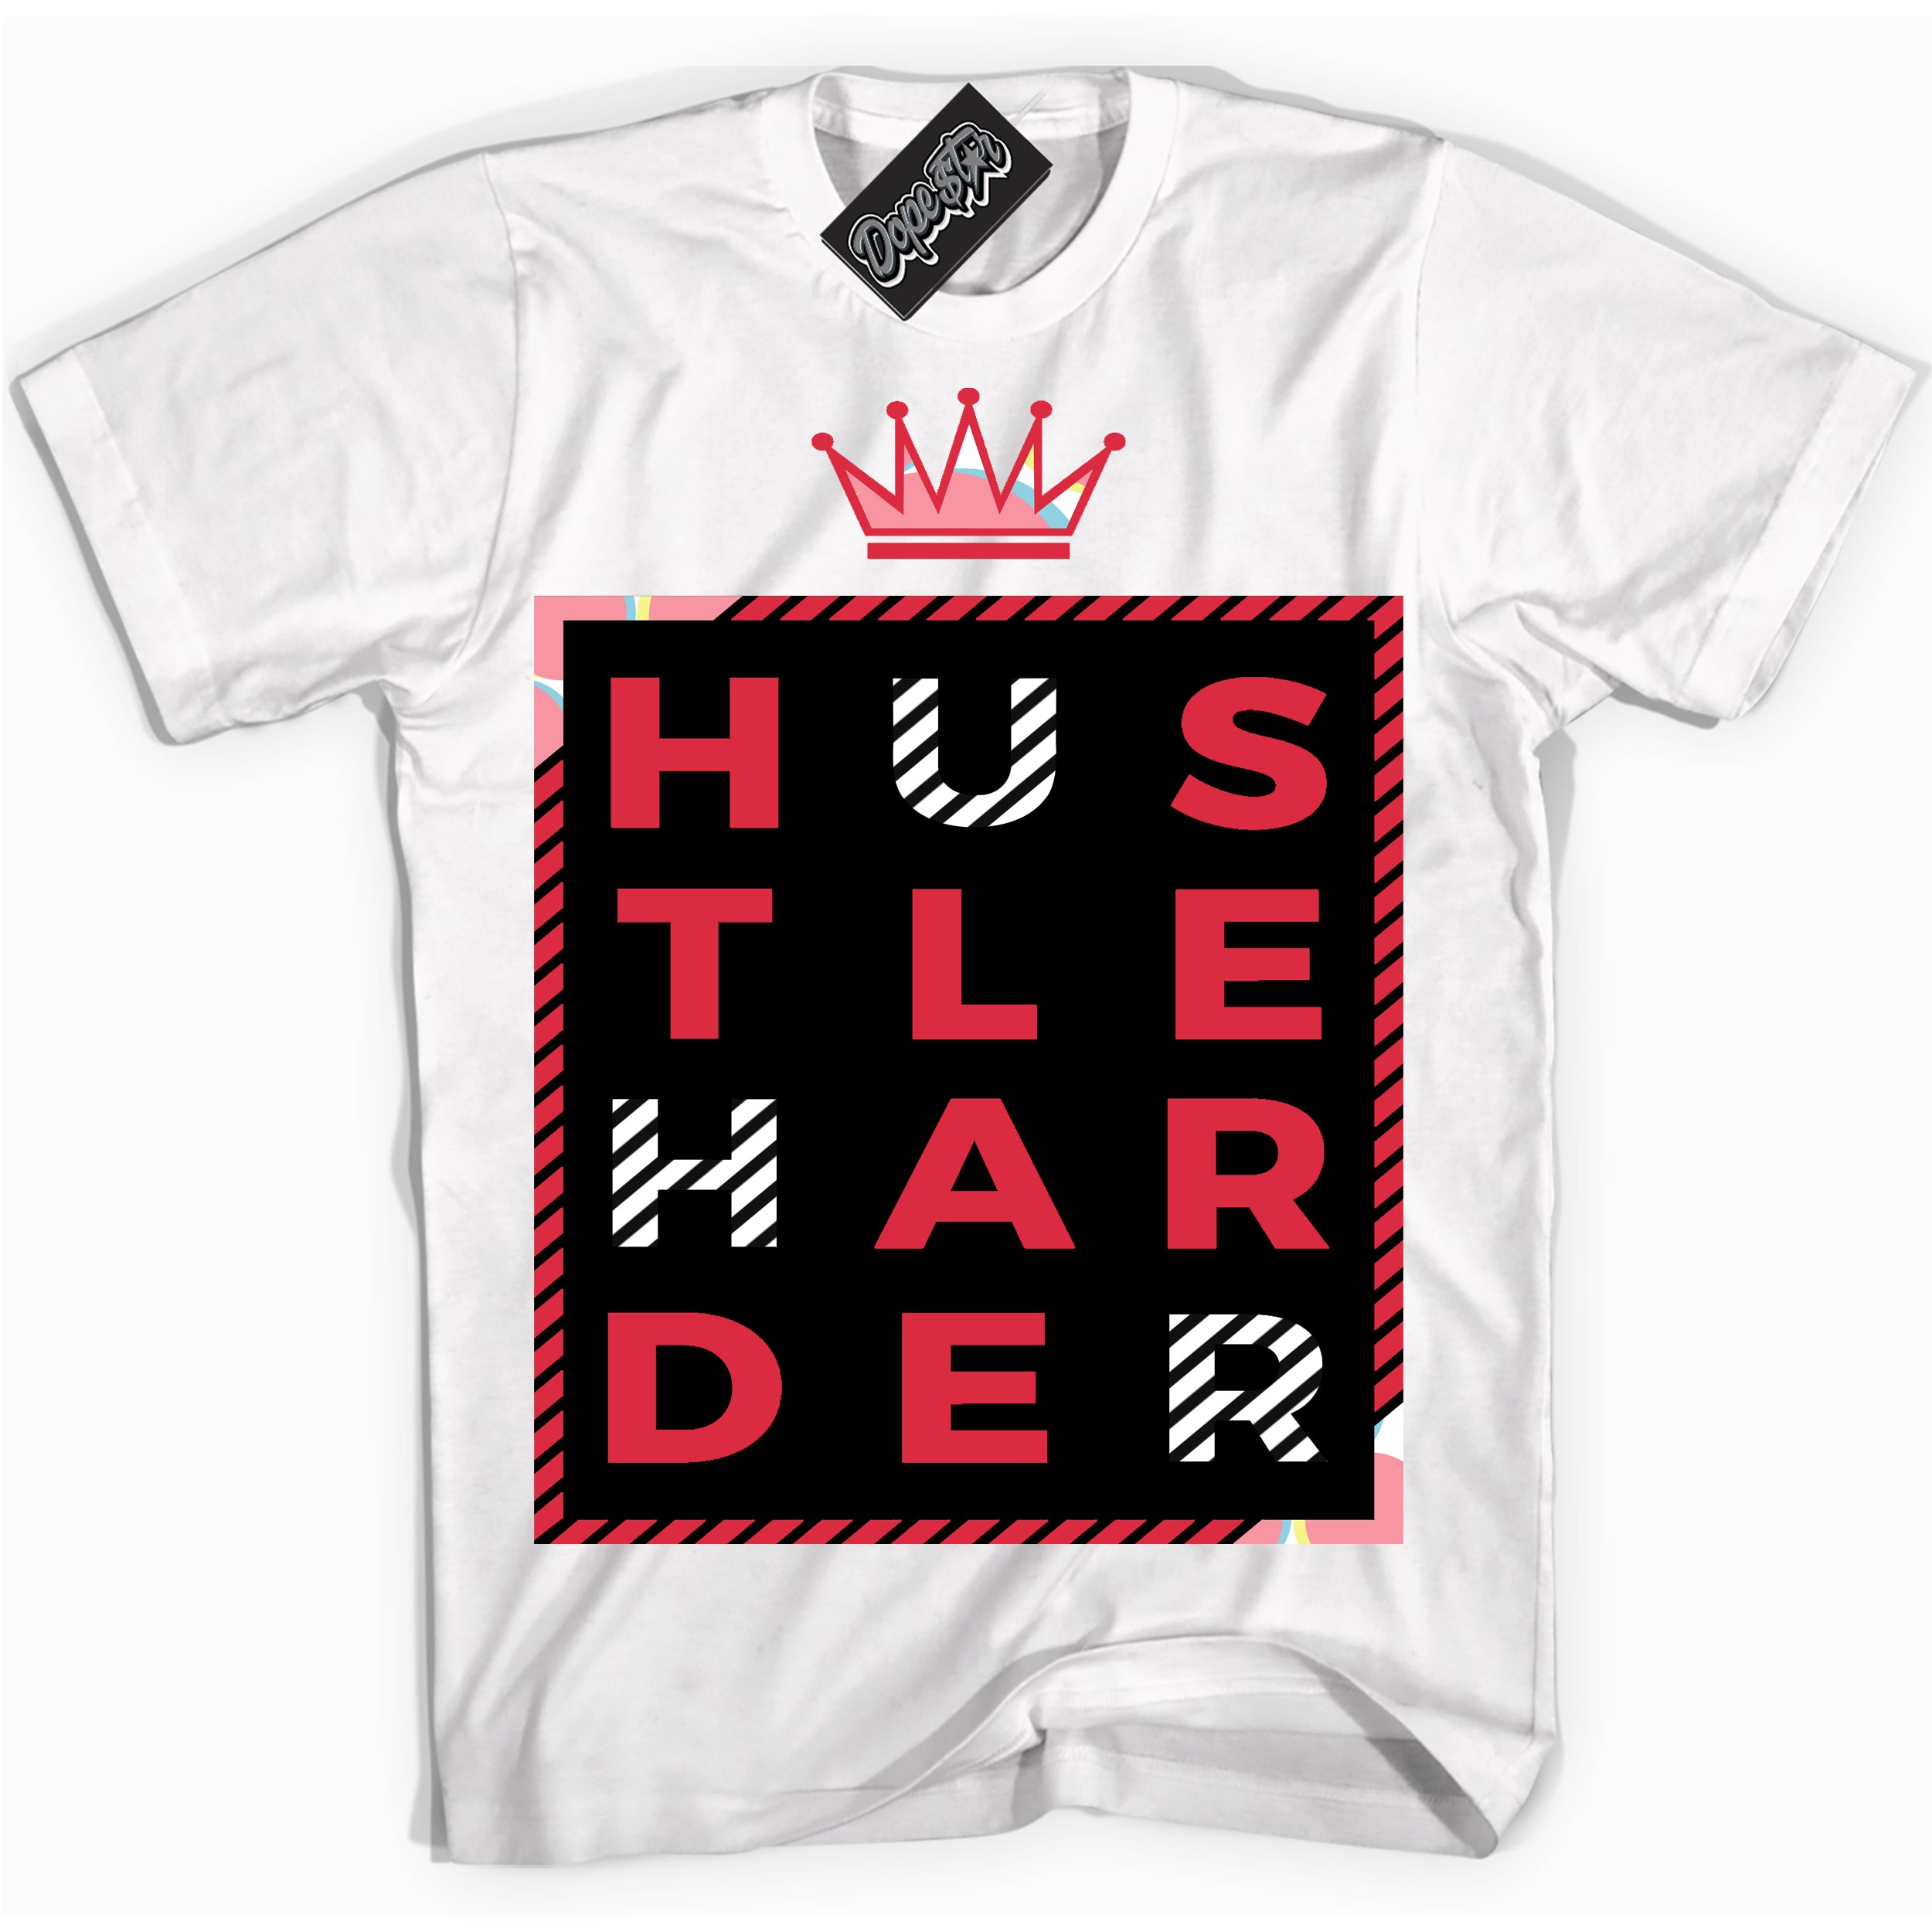 Cool White graphic tee with “ Hustle Harder ” design, that perfectly matches Spider-Verse 1s sneakers 